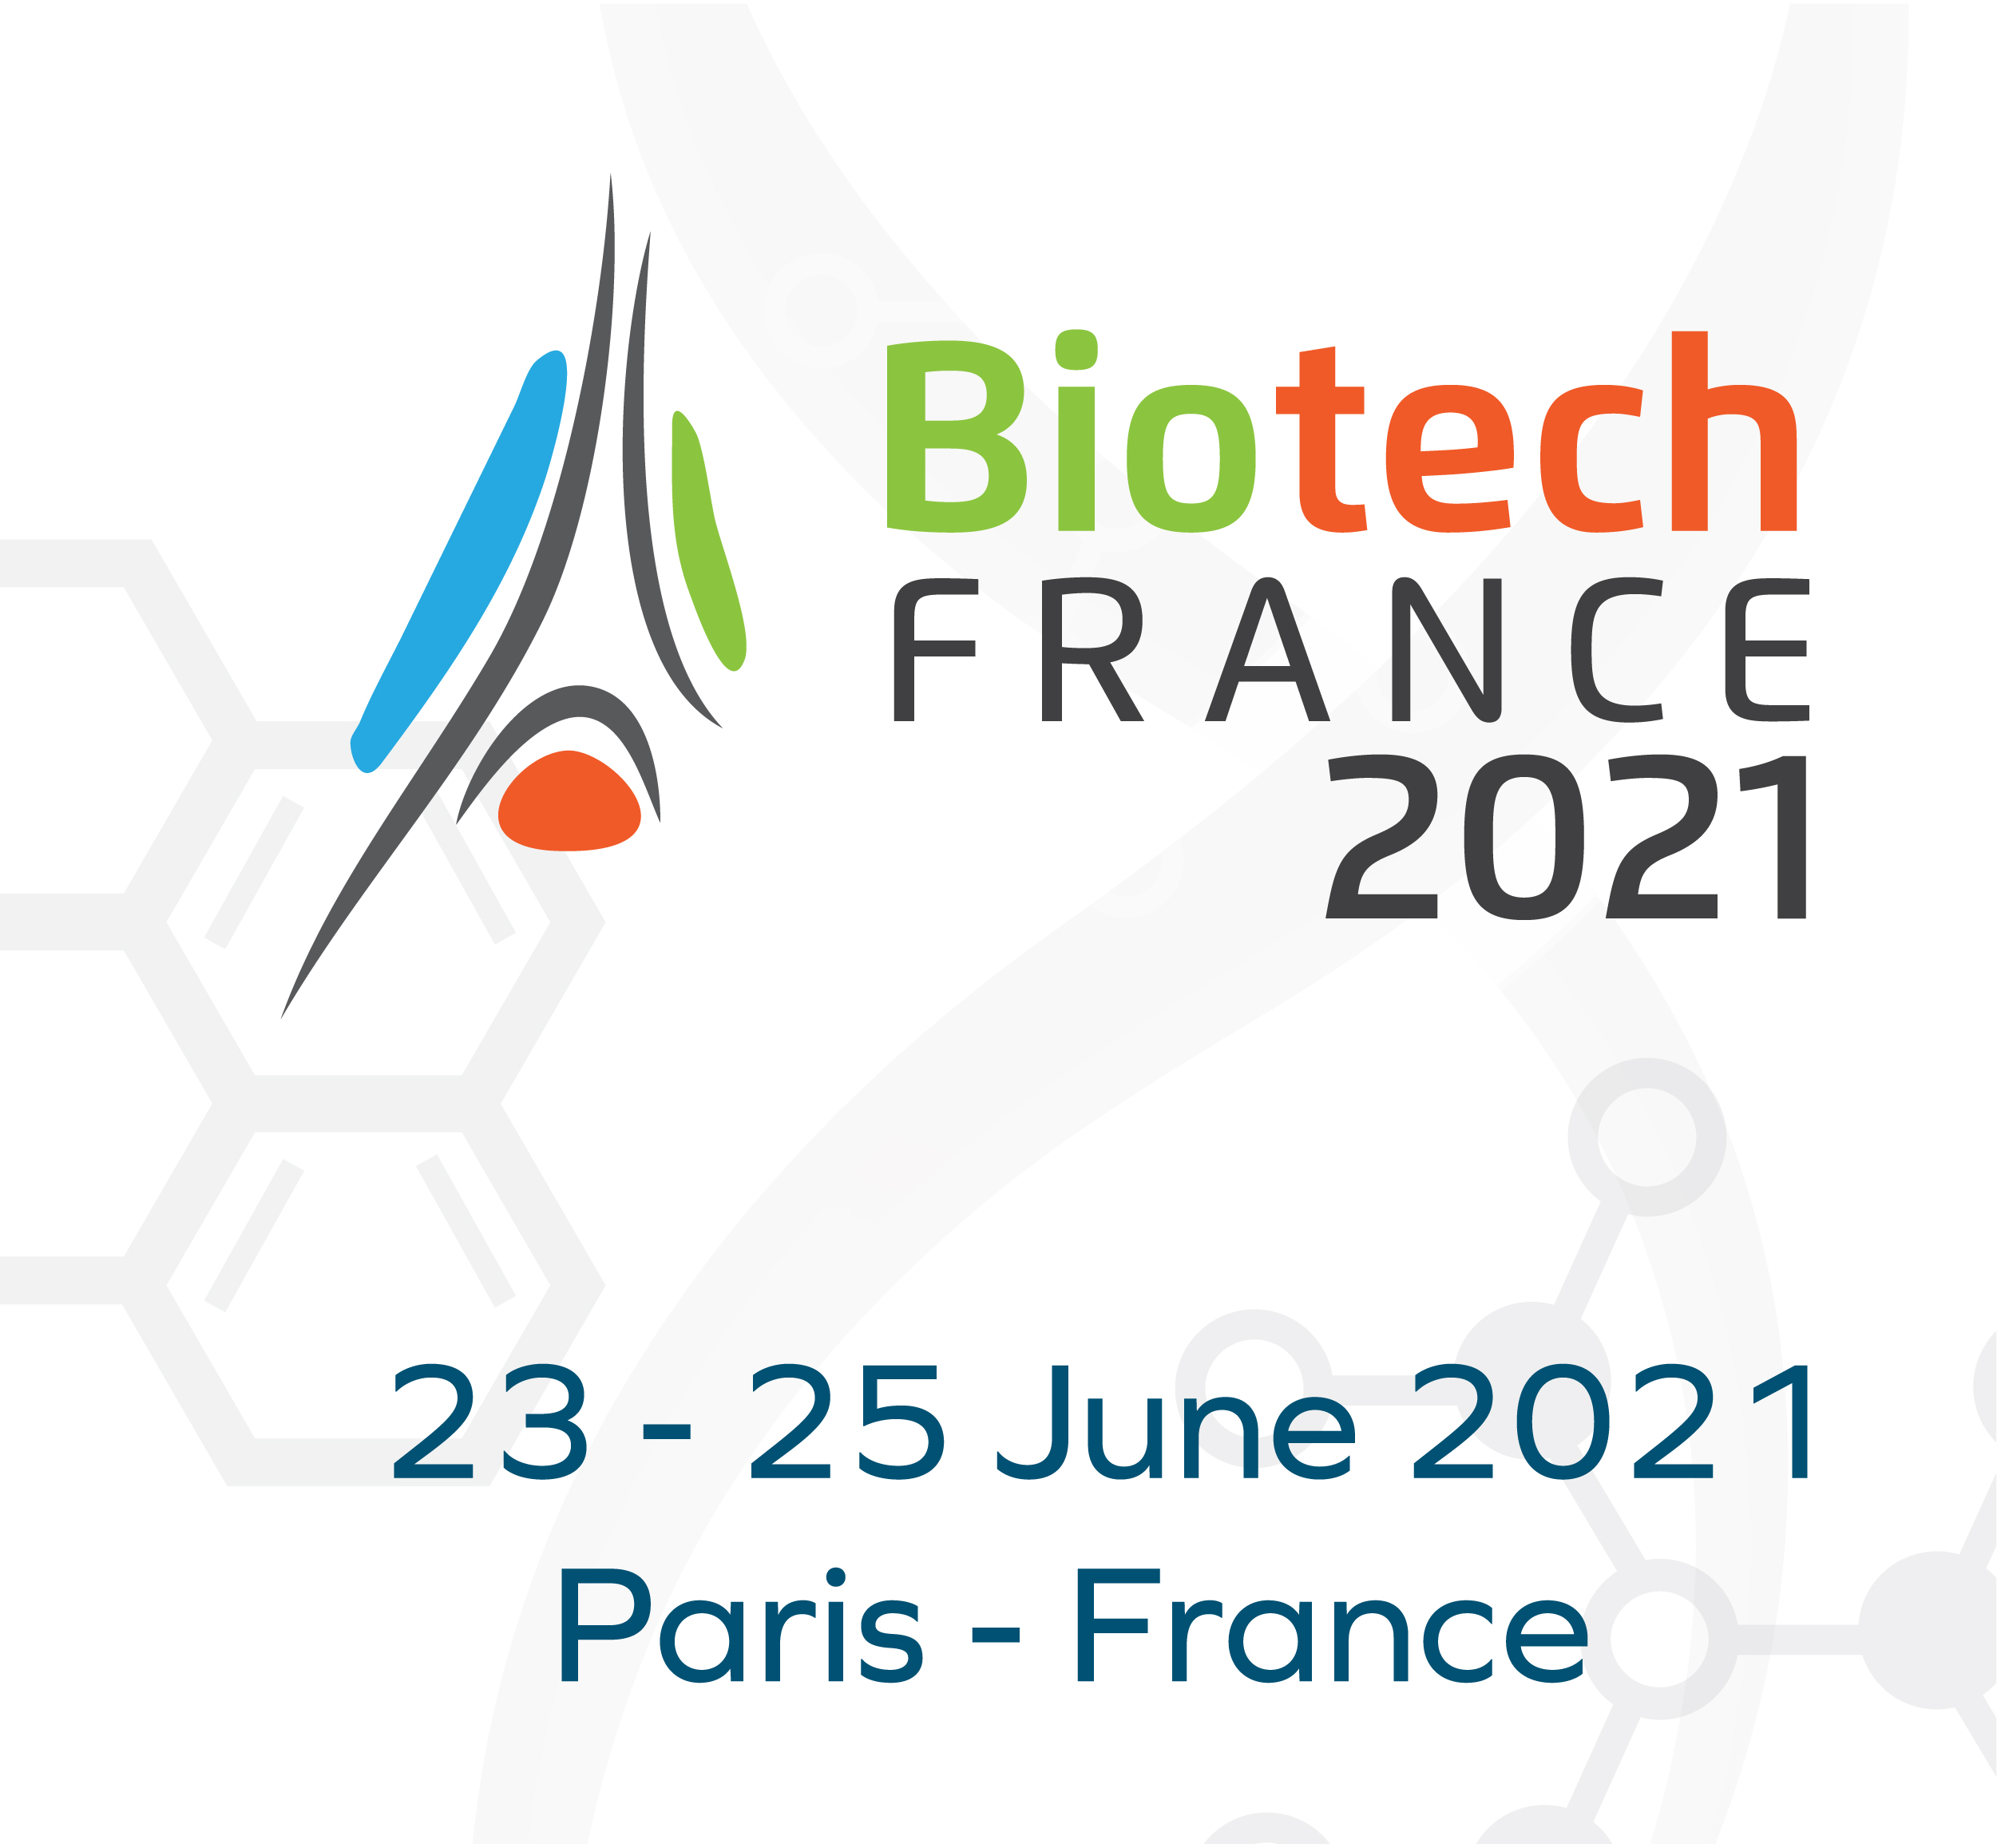 Biotech France 2021 international conference and exhibition, 23 - 25 June 2021, Paris, France